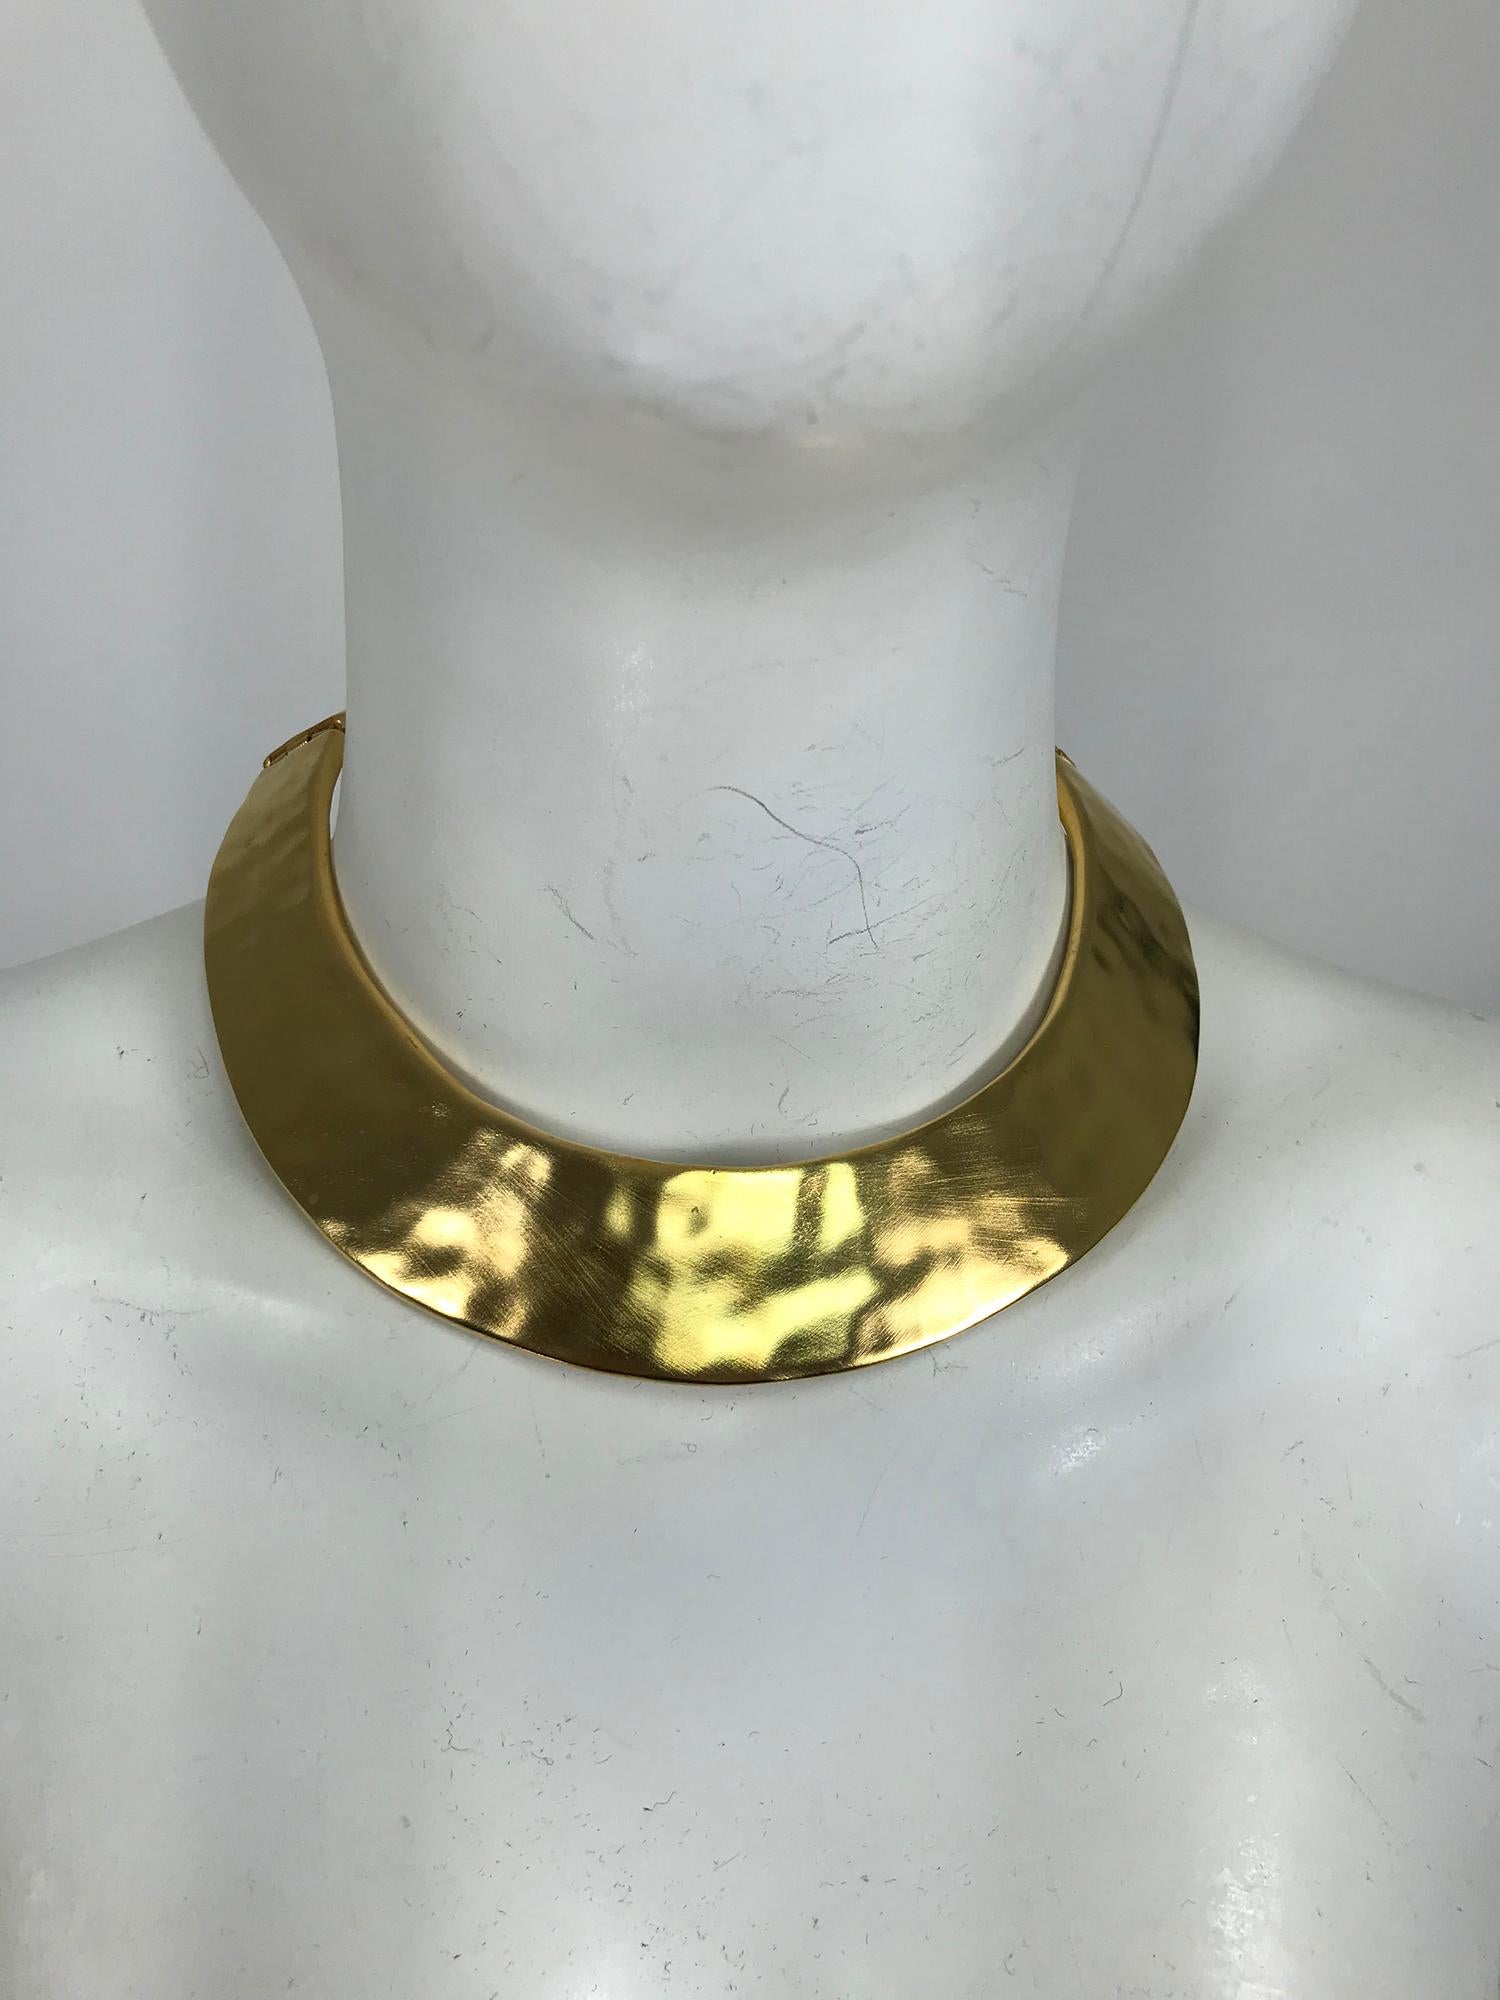 Vintage Givenchy hammered gold metal collar necklace from the 1990s. Arty hammered gold metal collar with a fine brushed, collar is hinged at each back side. In very good pre owned condition. 
Measurements are in inches:
13 at upper neck
1 1/8 wide